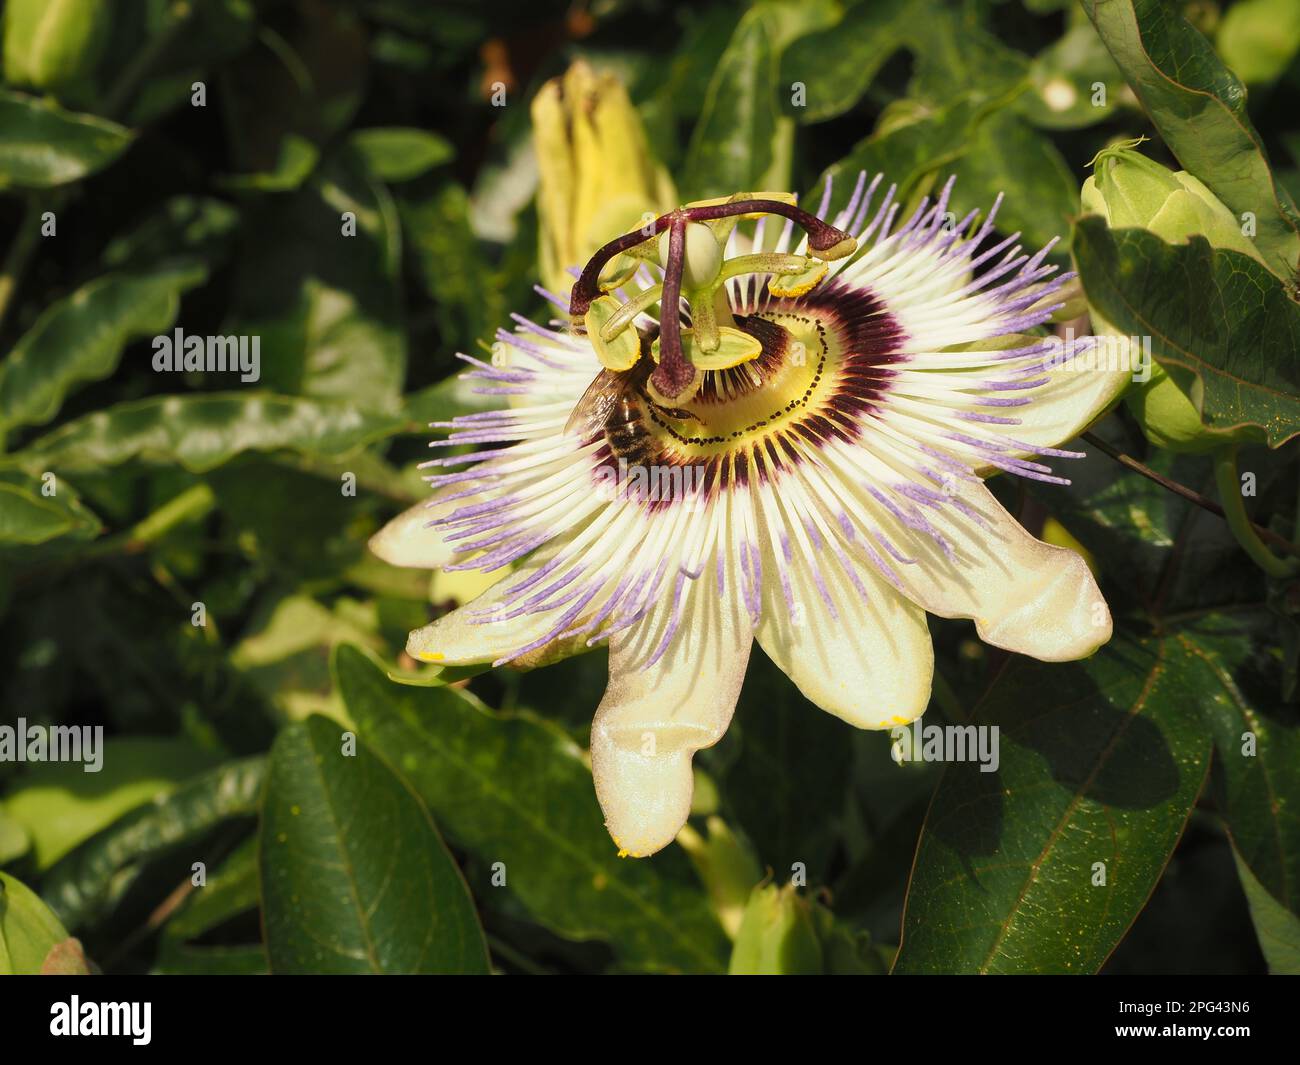 Blue passion fruit flower (passiflora caerulea) being visited by a bee in an English garden. The flower is the national flower of Paraguay. Stock Photo